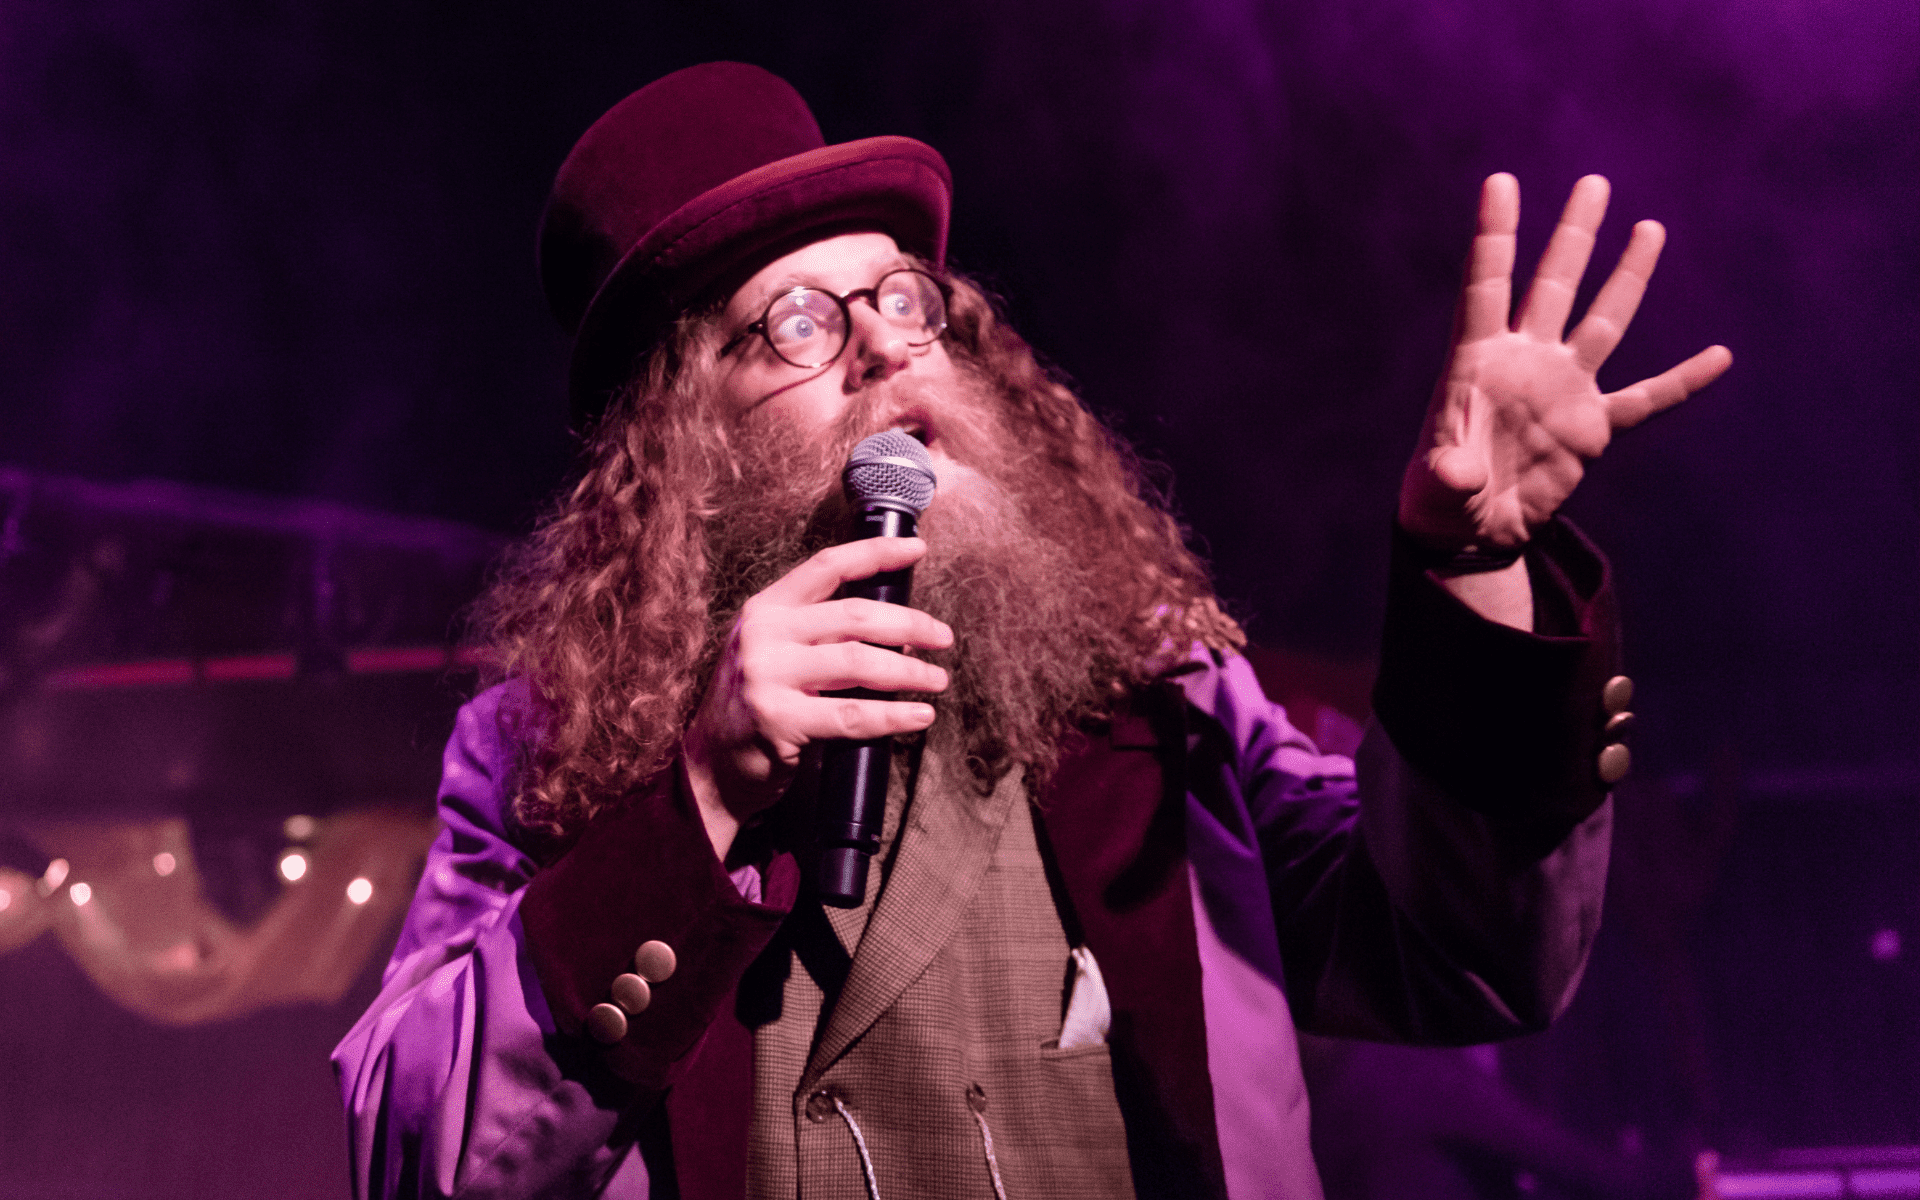 Ben Caplan on stage wearing a purple coat, top hat, and round glasses.